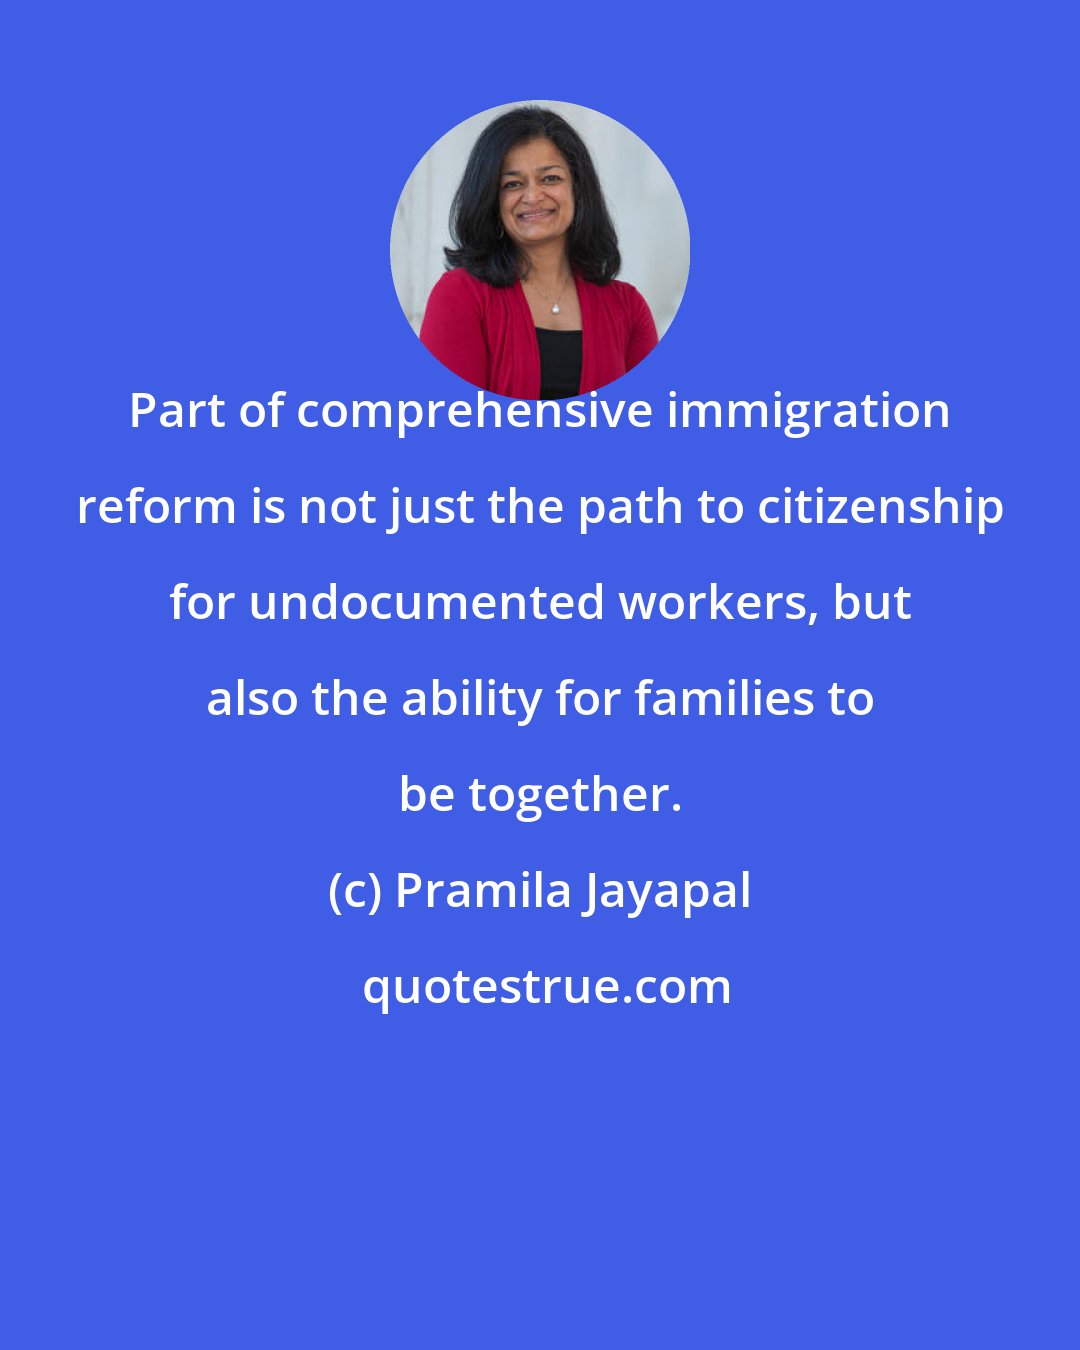 Pramila Jayapal: Part of comprehensive immigration reform is not just the path to citizenship for undocumented workers, but also the ability for families to be together.